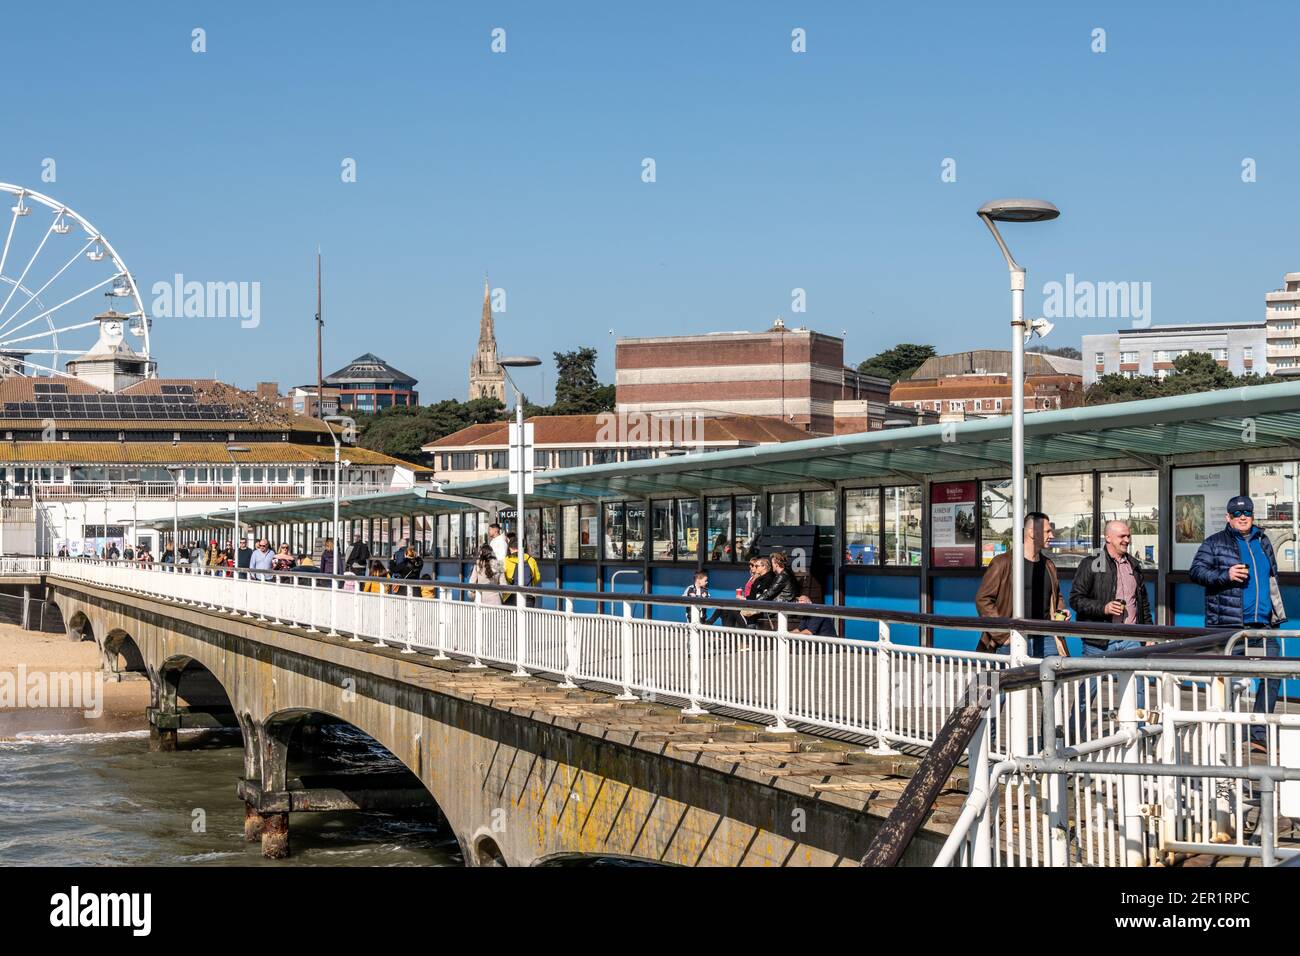 Bournemouth, UK. Sunday 28 March 2021. Crowds of people on Bournemouth beach with some social distancing. Credit: Thomas Faull/Alamy Live News Stock Photo